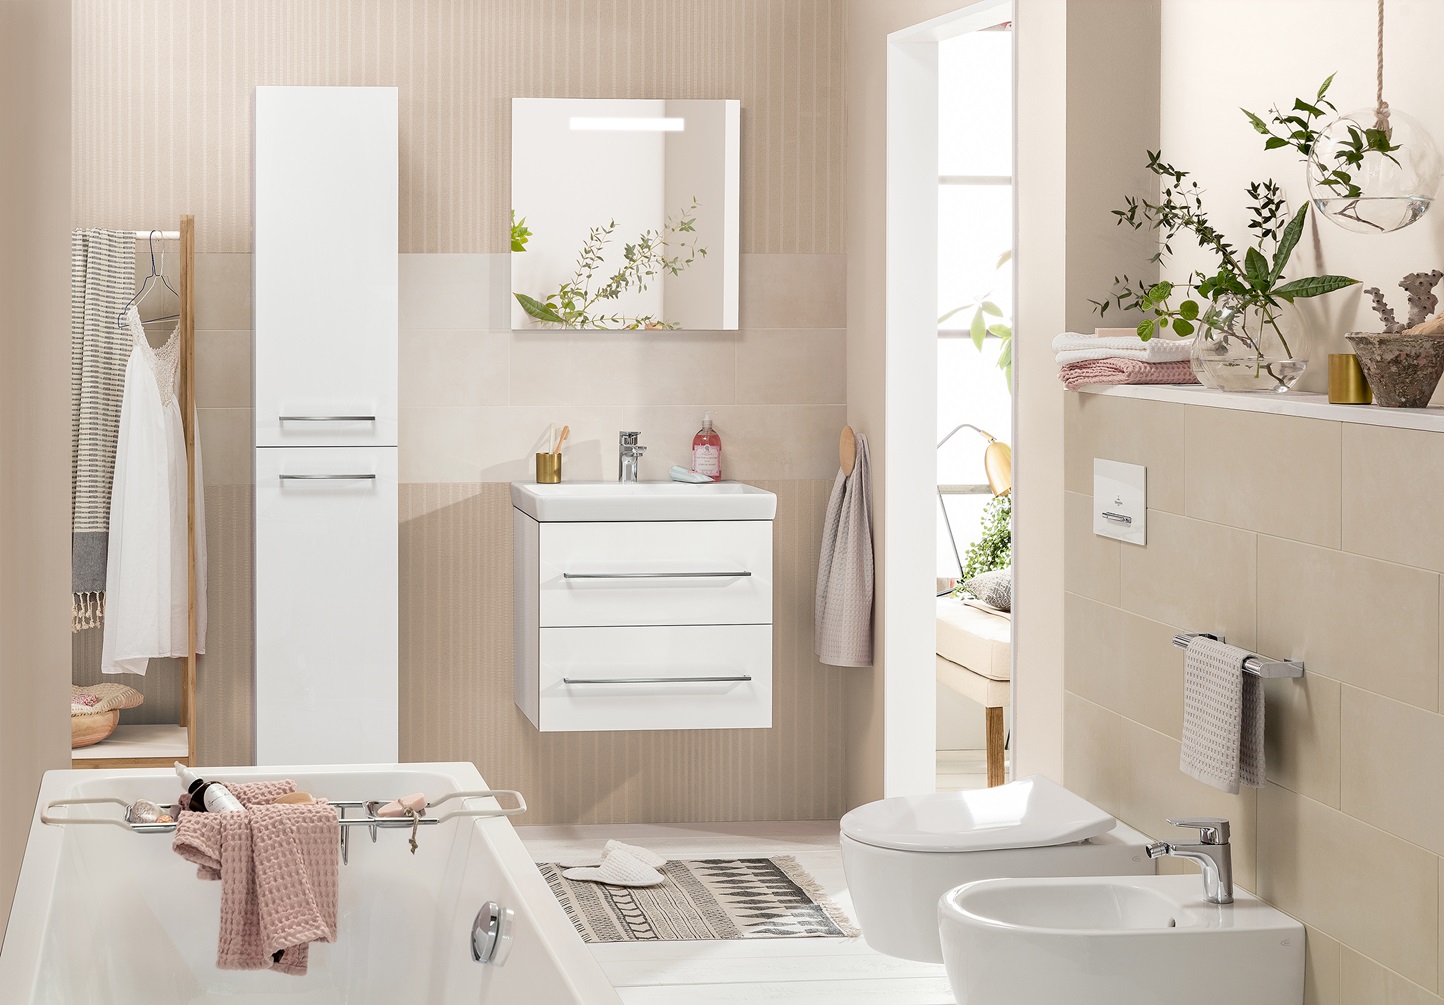 image of a modern bathroom with a white vanity unit